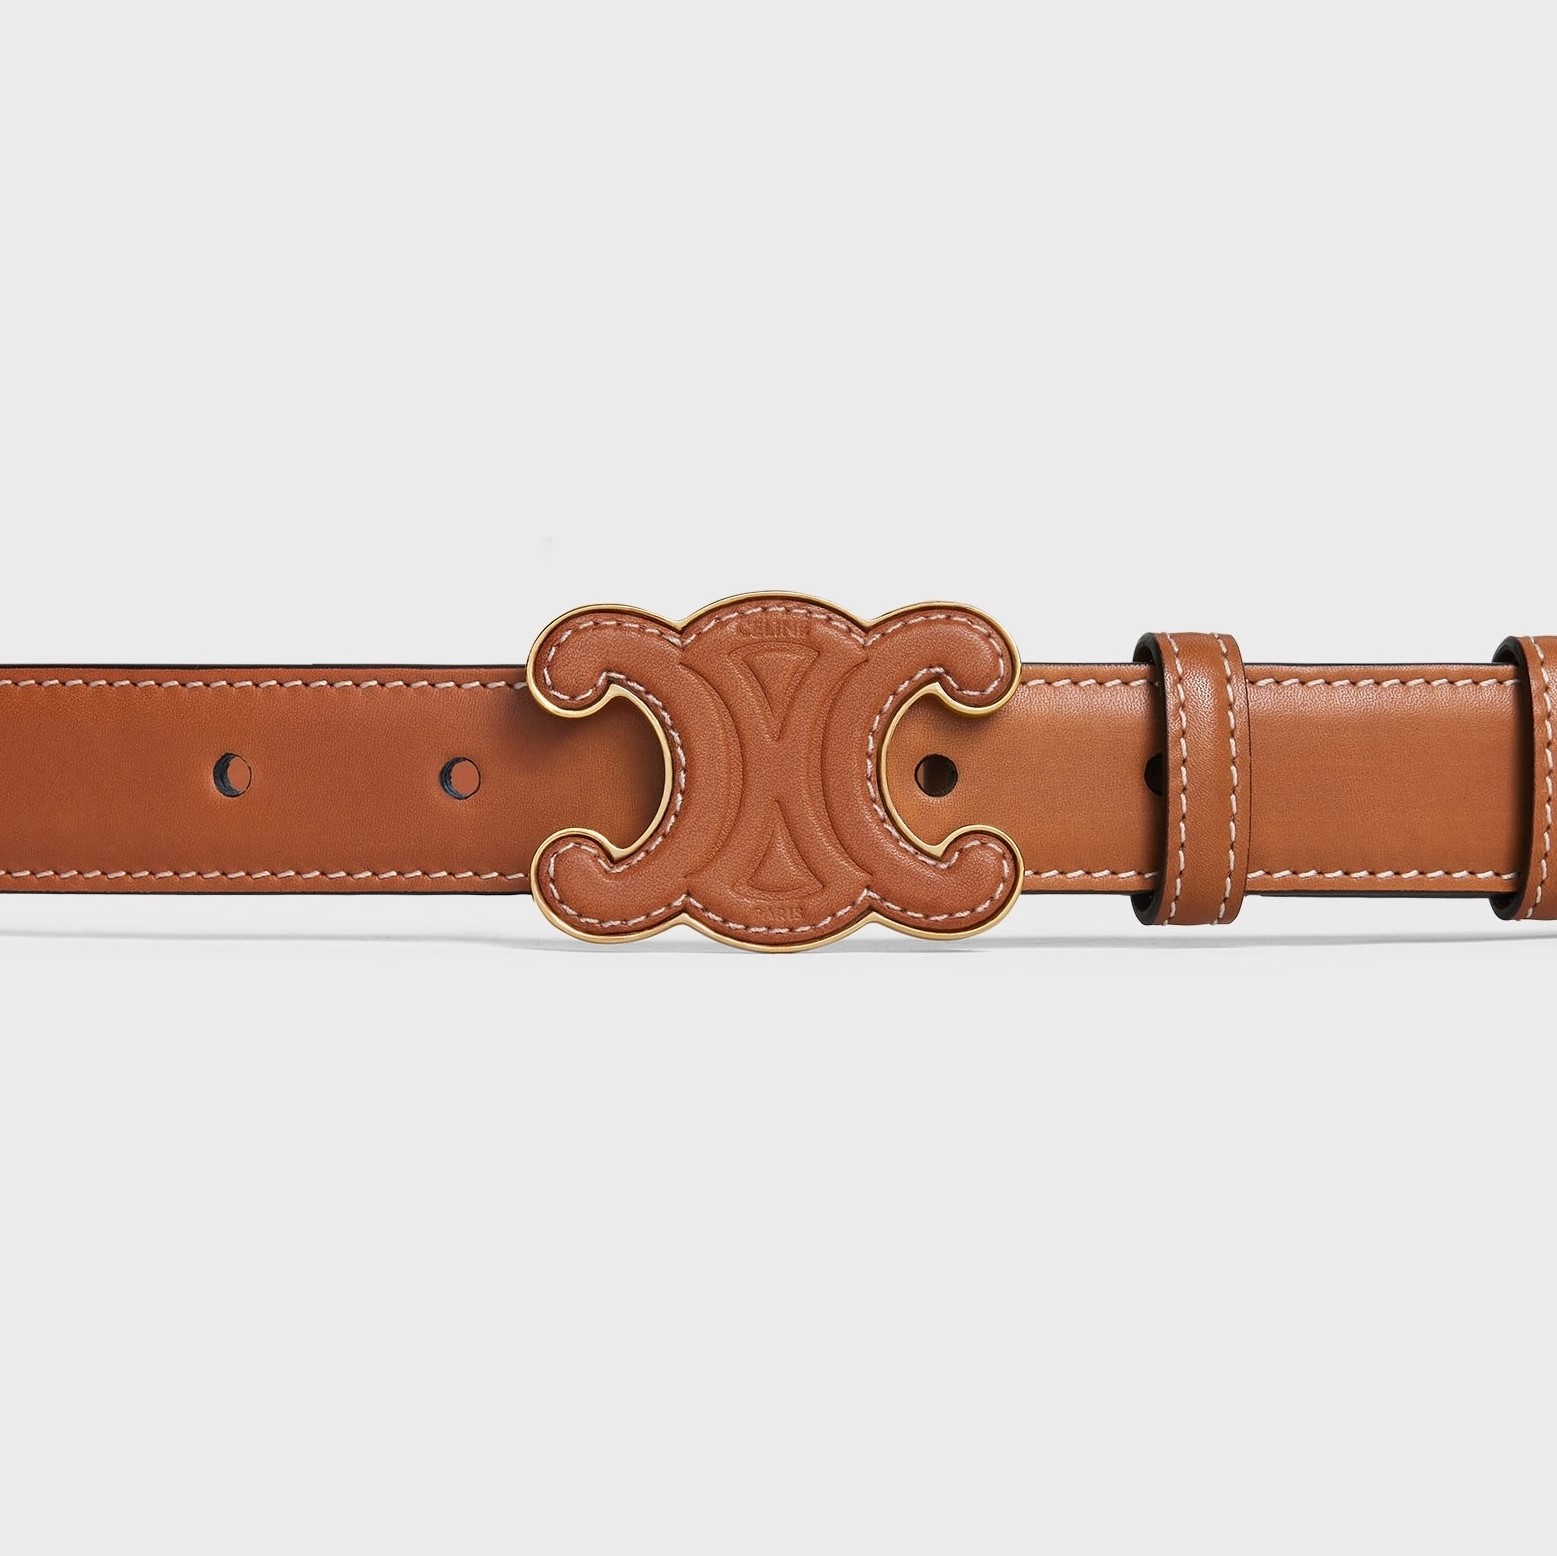 DÂY LƯNG NỮ CELINE MEDIUM CUIR TRIOMPHE BUCKLE WITH COLLAR STUD BELT IN TAN NATURAL CALFSKIN LEATHER 5